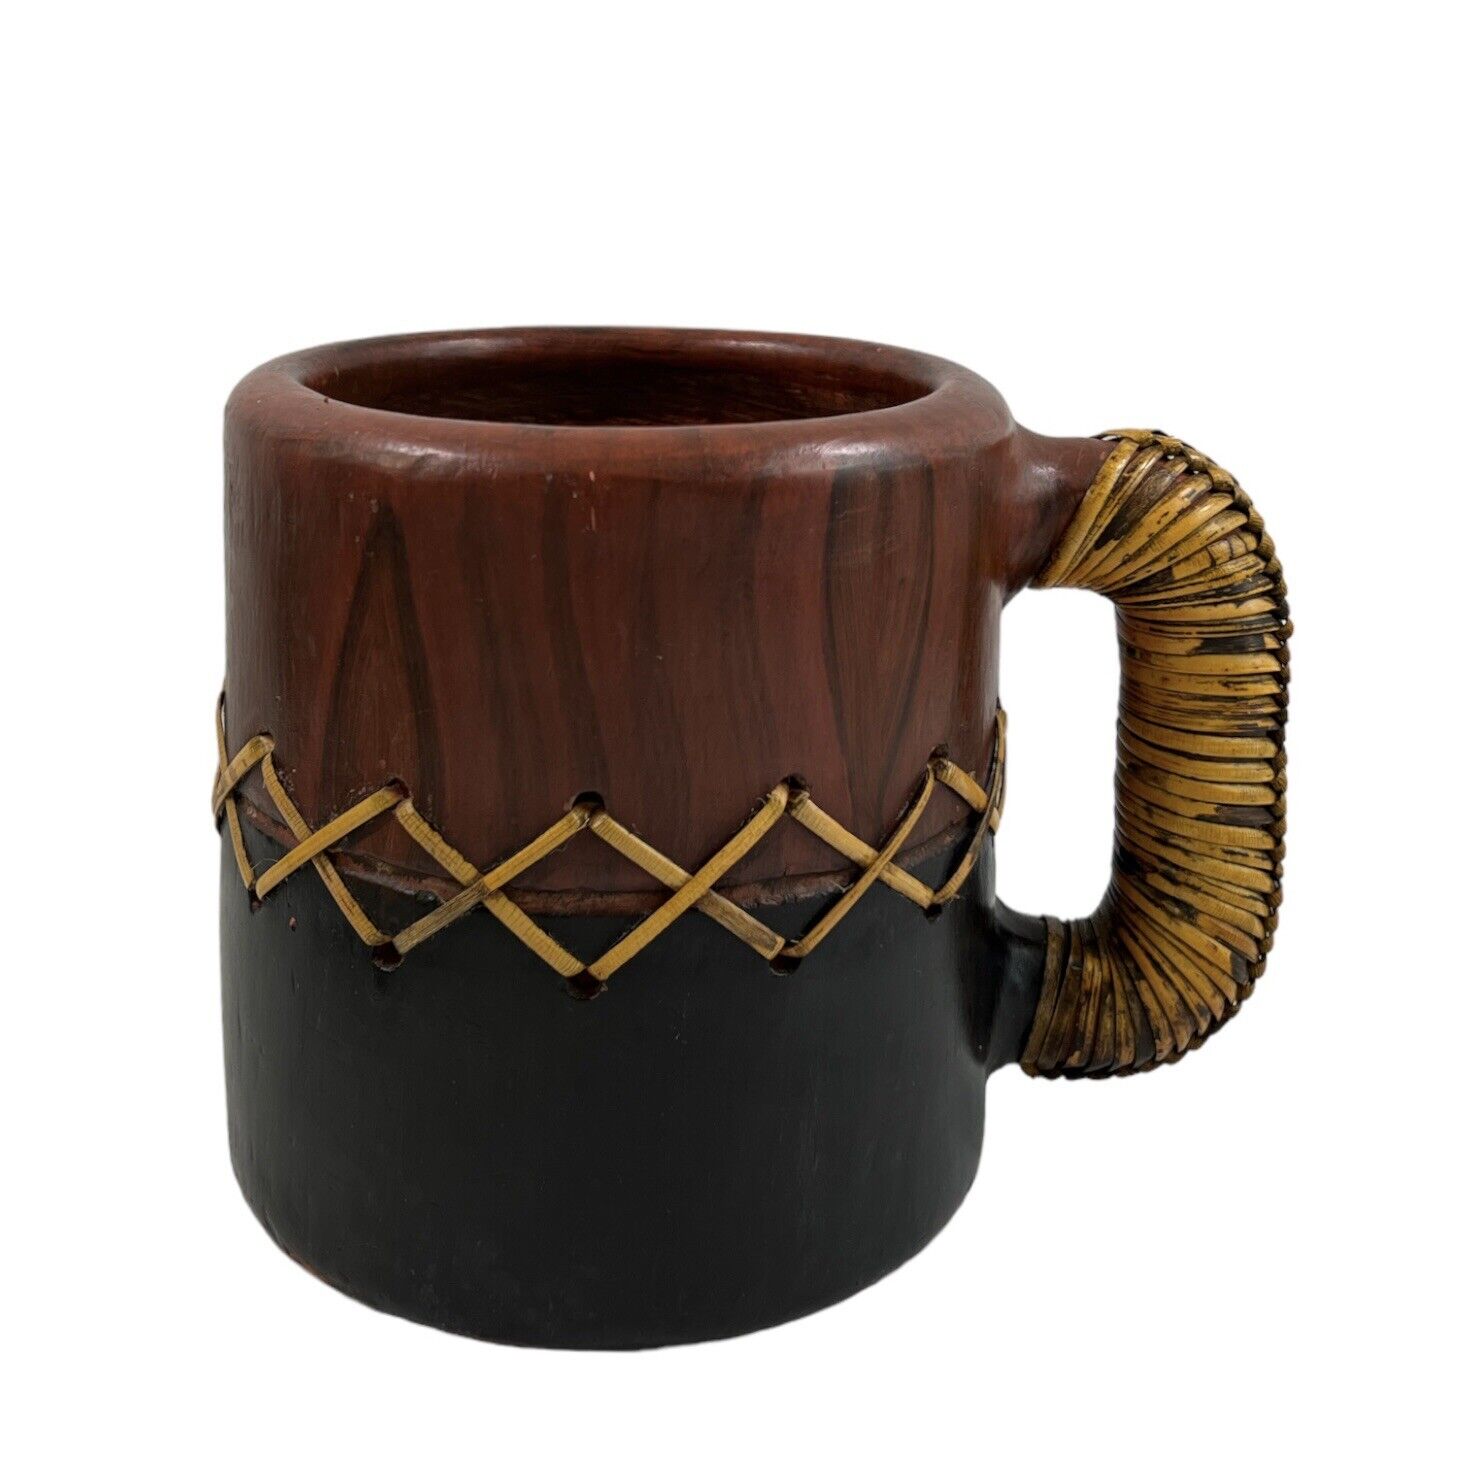 Handmade Terracotta Mug Shaped Planter With Woven Rattan Accents 